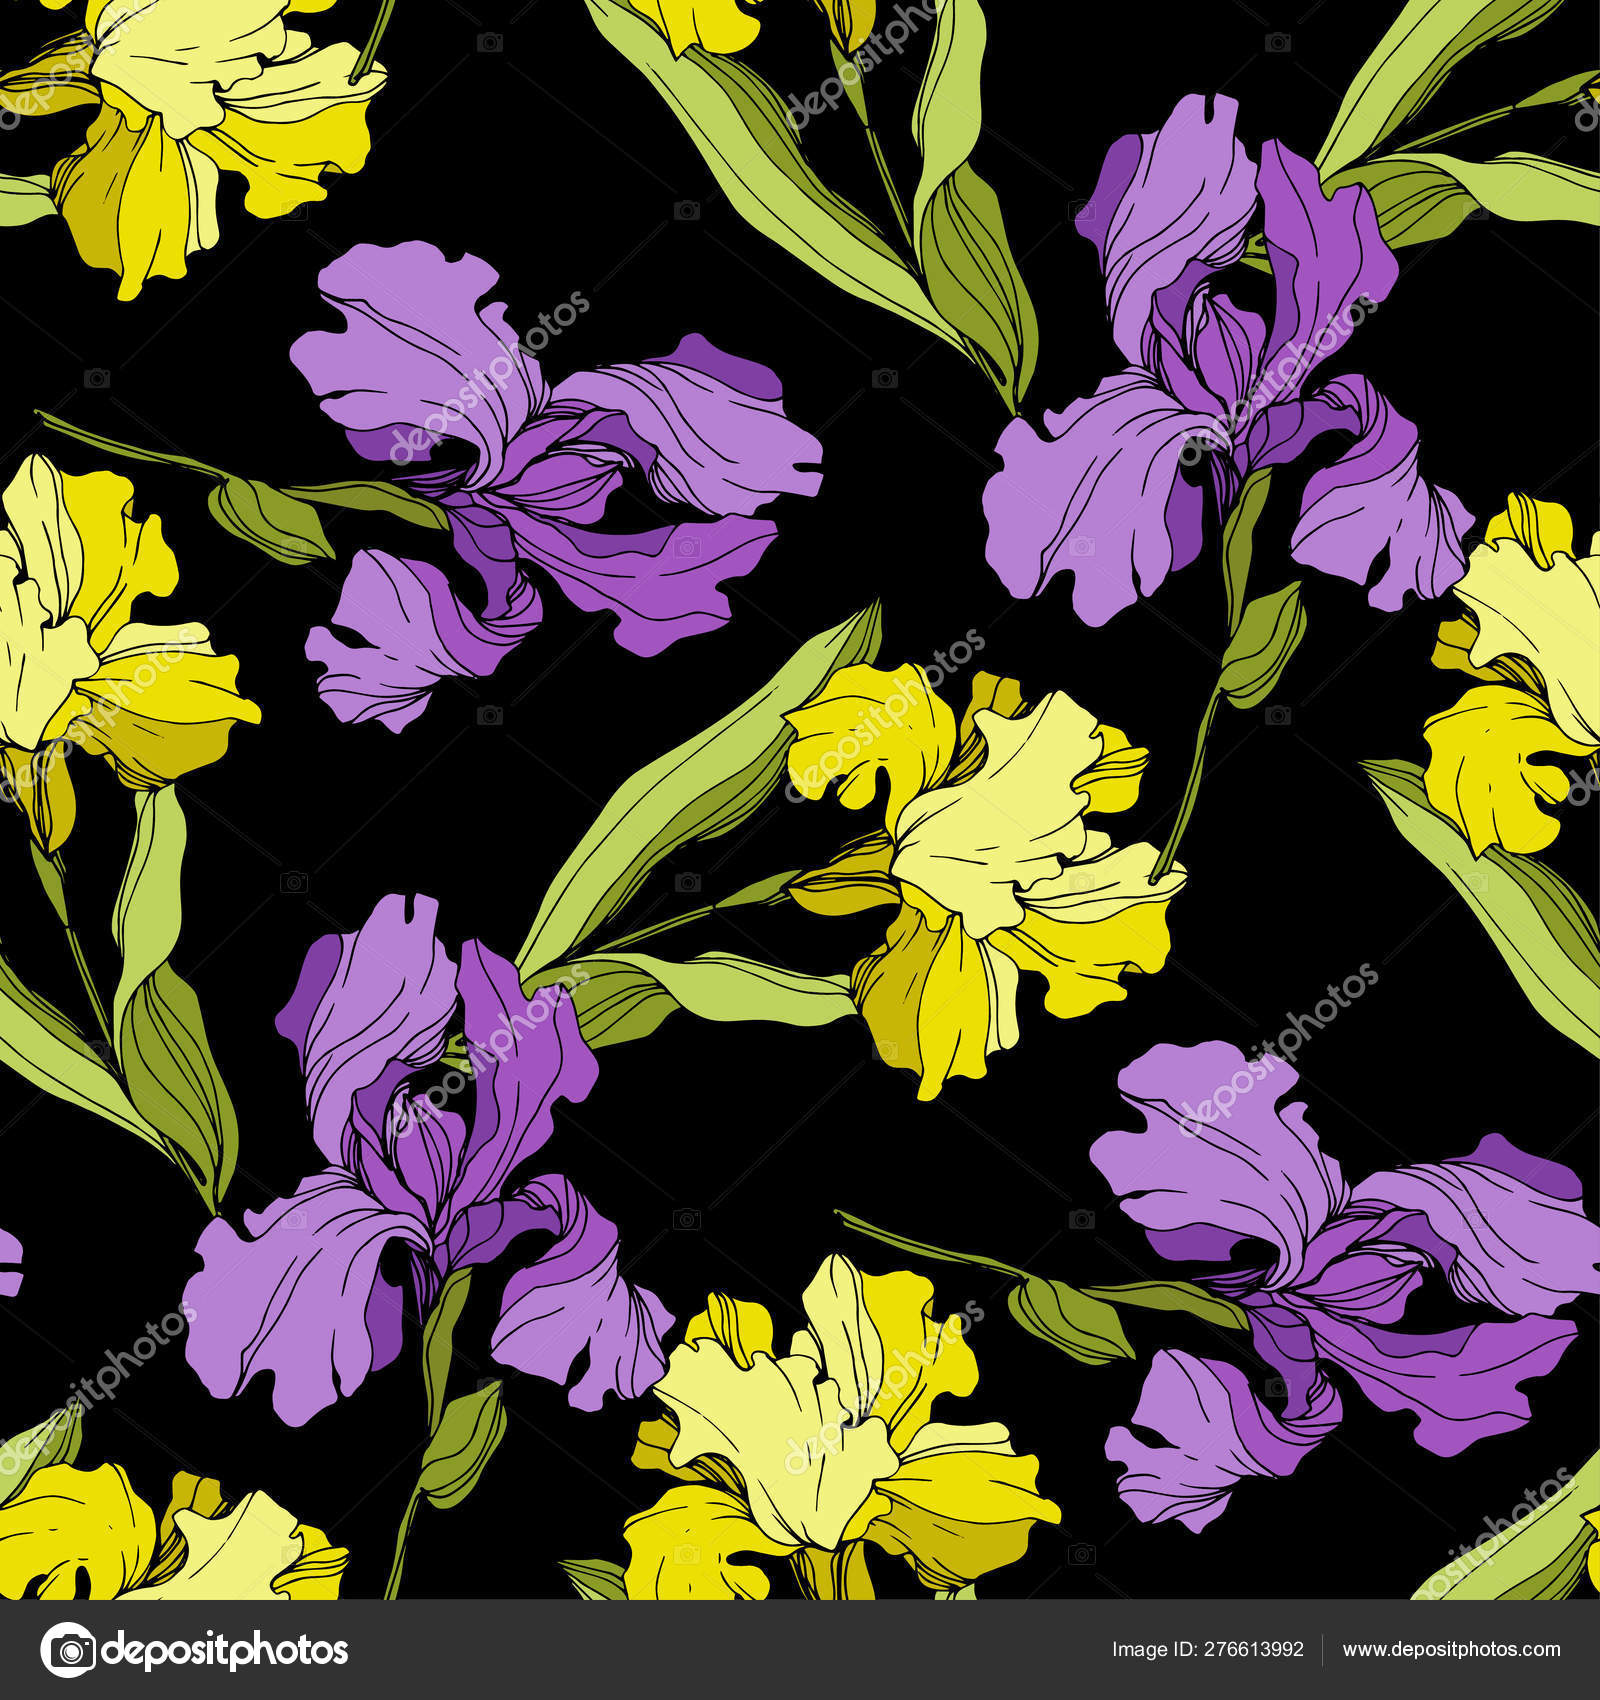 Vector Iris Floral Botanical Flower Seamless Background Pattern Fabric Wallpaper Print Texture Vector Image By C Andreyanush Vector Stock